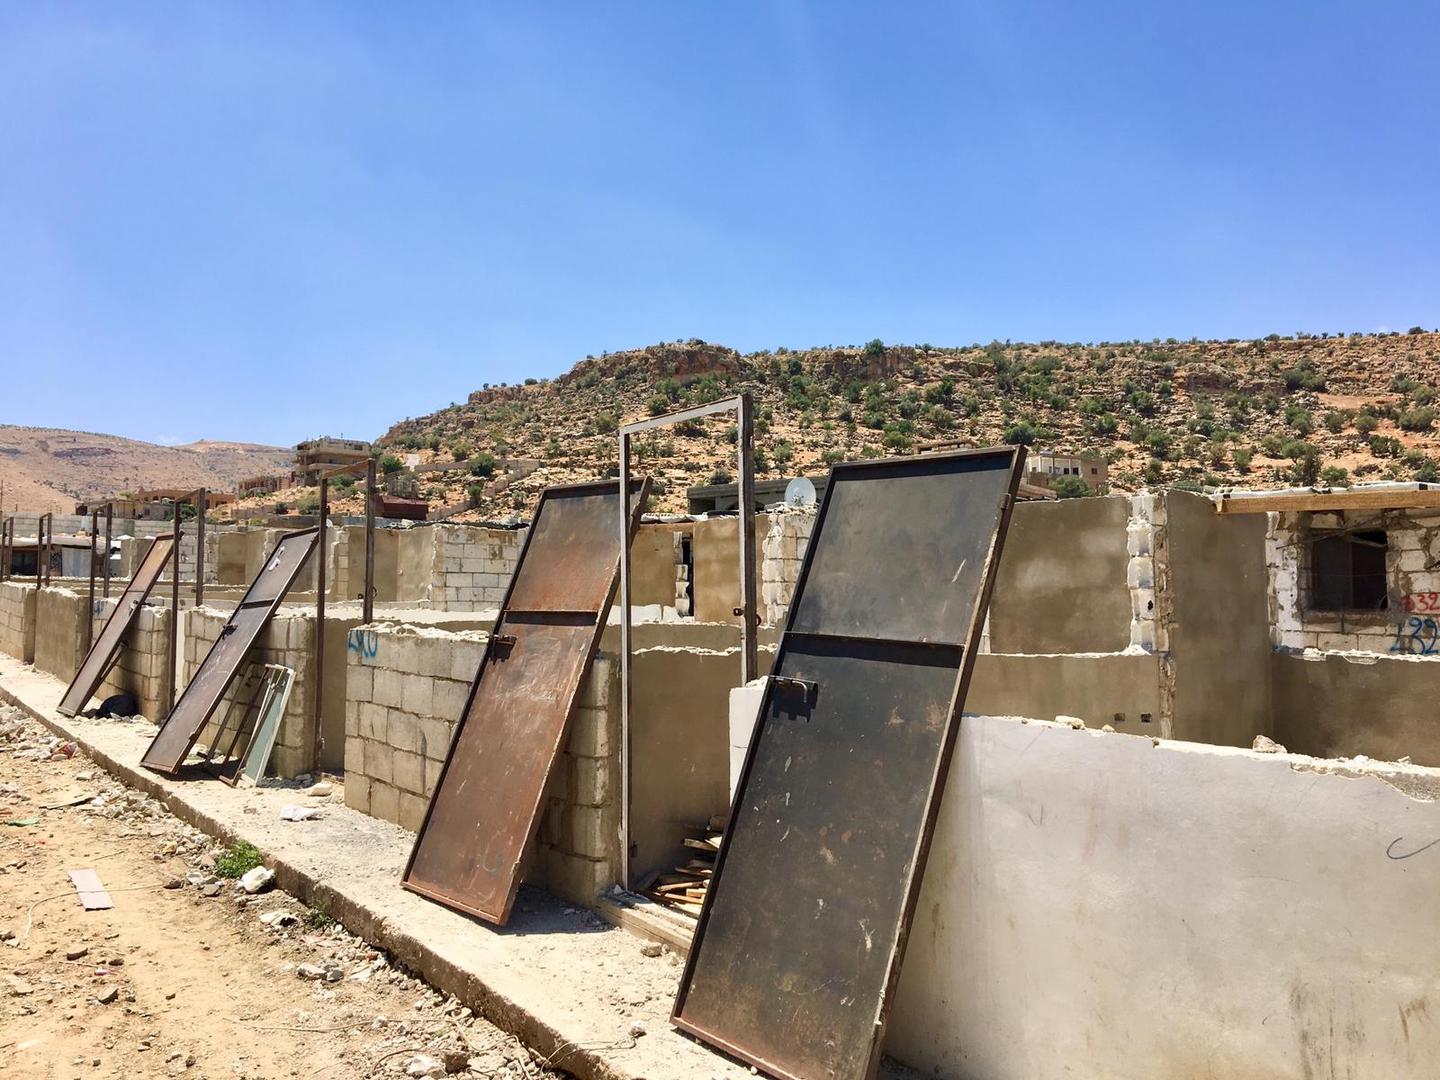 Dismantled shelters in a Syrian refugee camp in Arsal, Lebanon, June 20, 2019. 